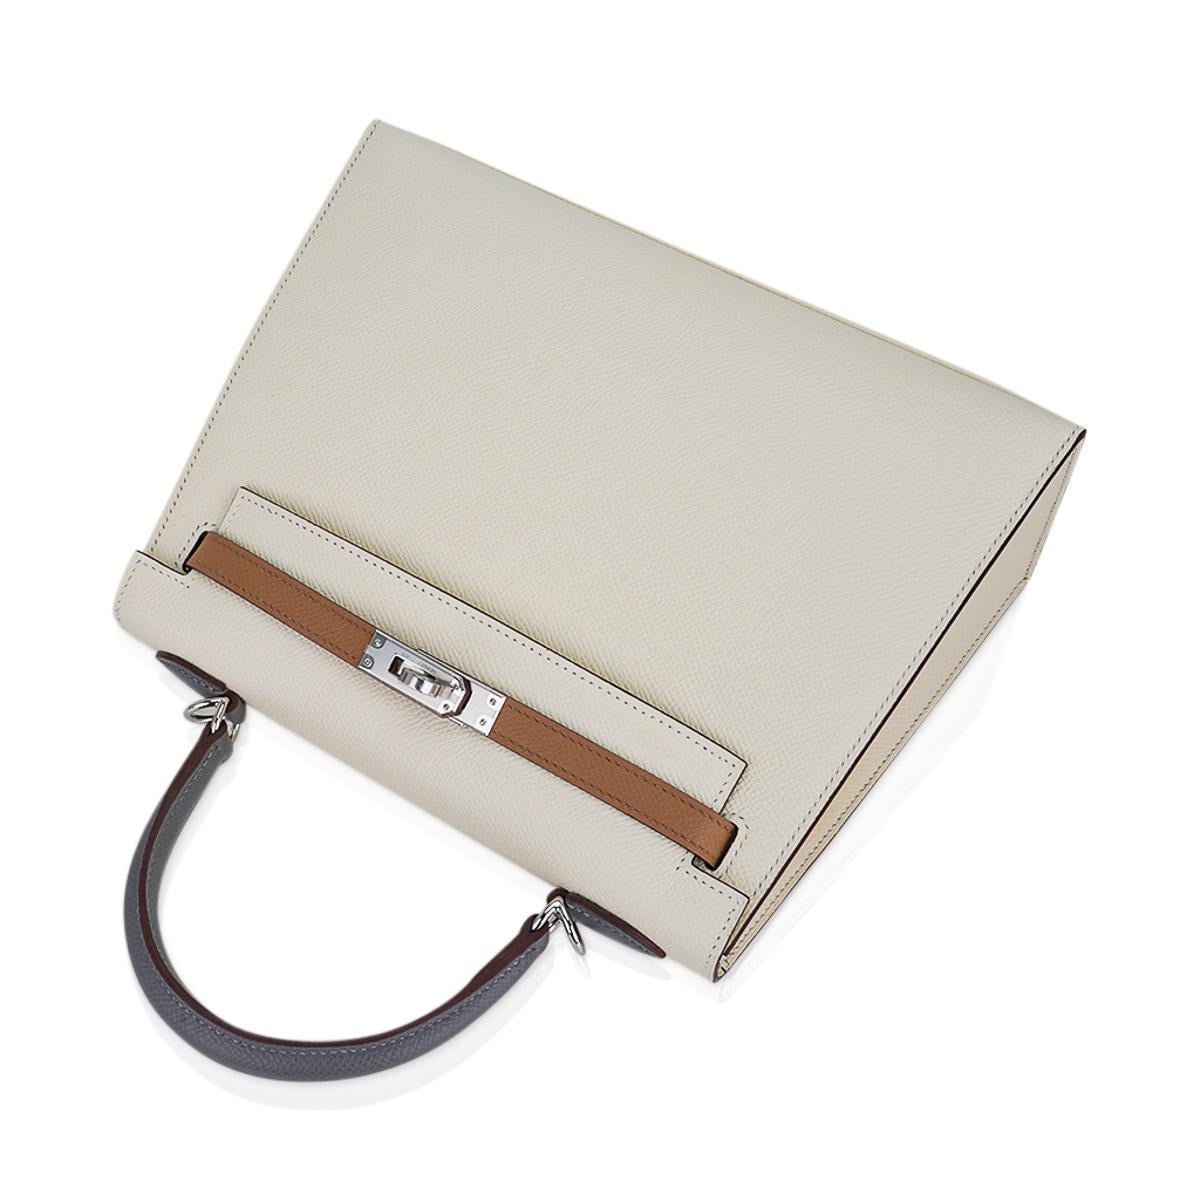 Hermes Kelly Sellier 25 Bag Nata / Chai / Gris Meyer Palladium Hardware Epsom In New Condition For Sale In Miami, FL